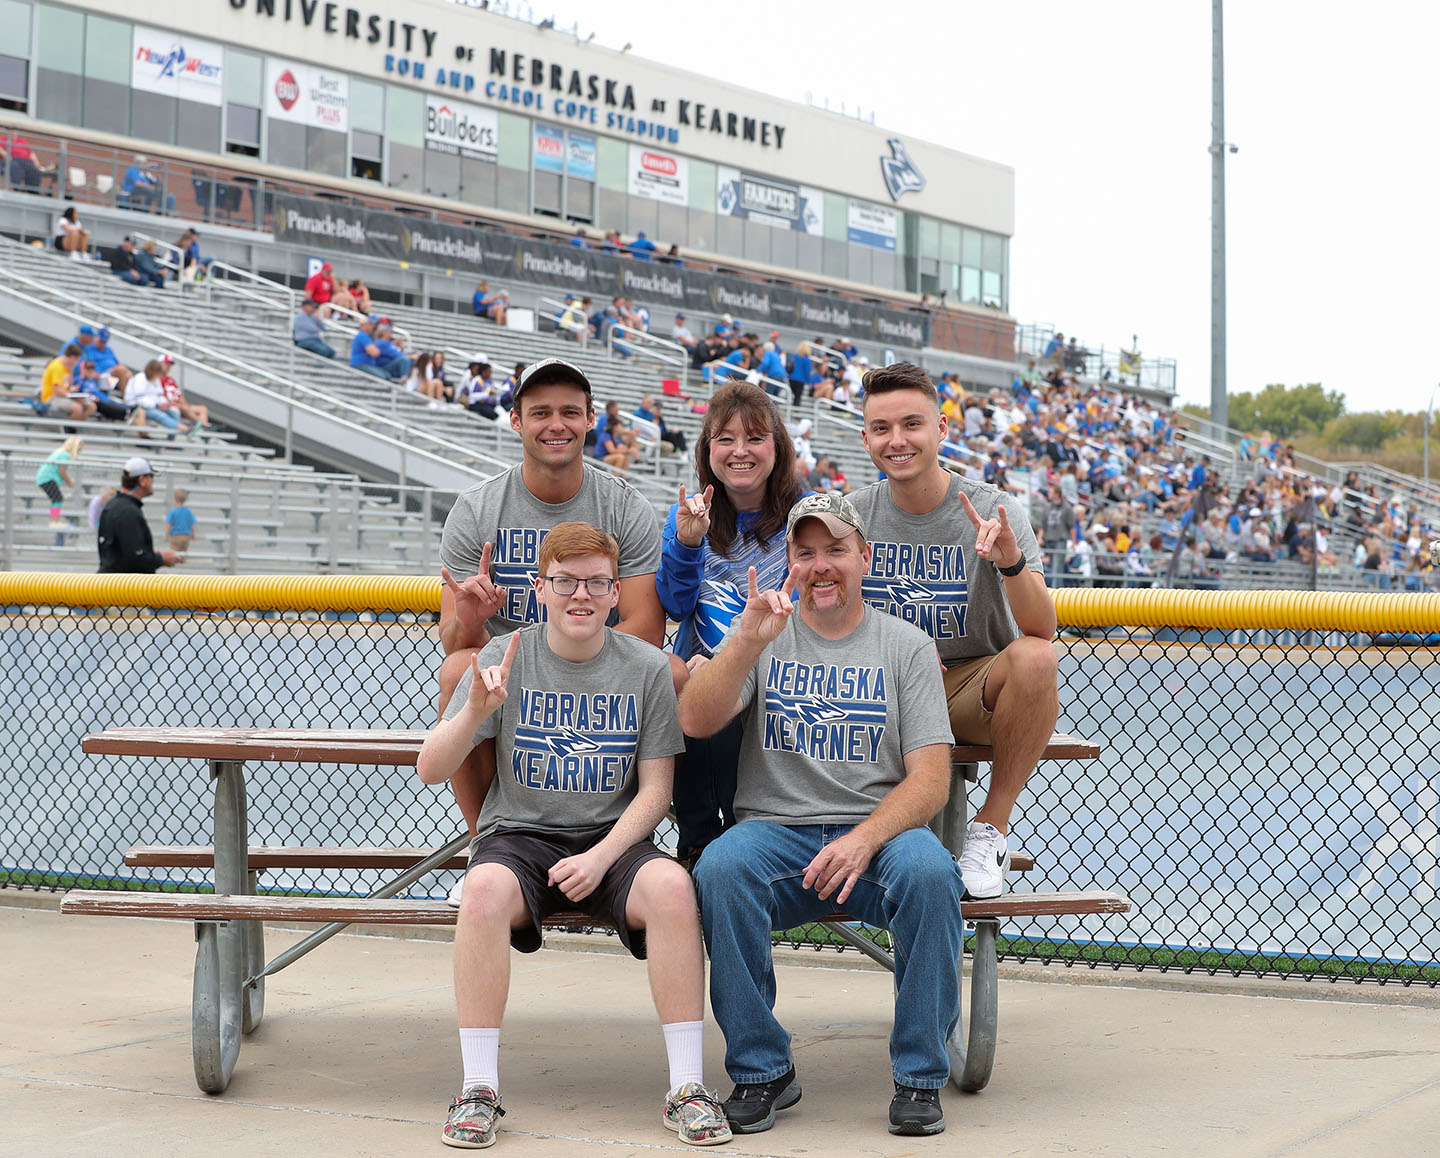 Ryan Woitalewicz, back right, is pictured at Cope Stadium with his older brother Matt, back left, mother Melissa, younger brother Logan Shuda, front left, and Melissa’s significant other Chad Shuda.